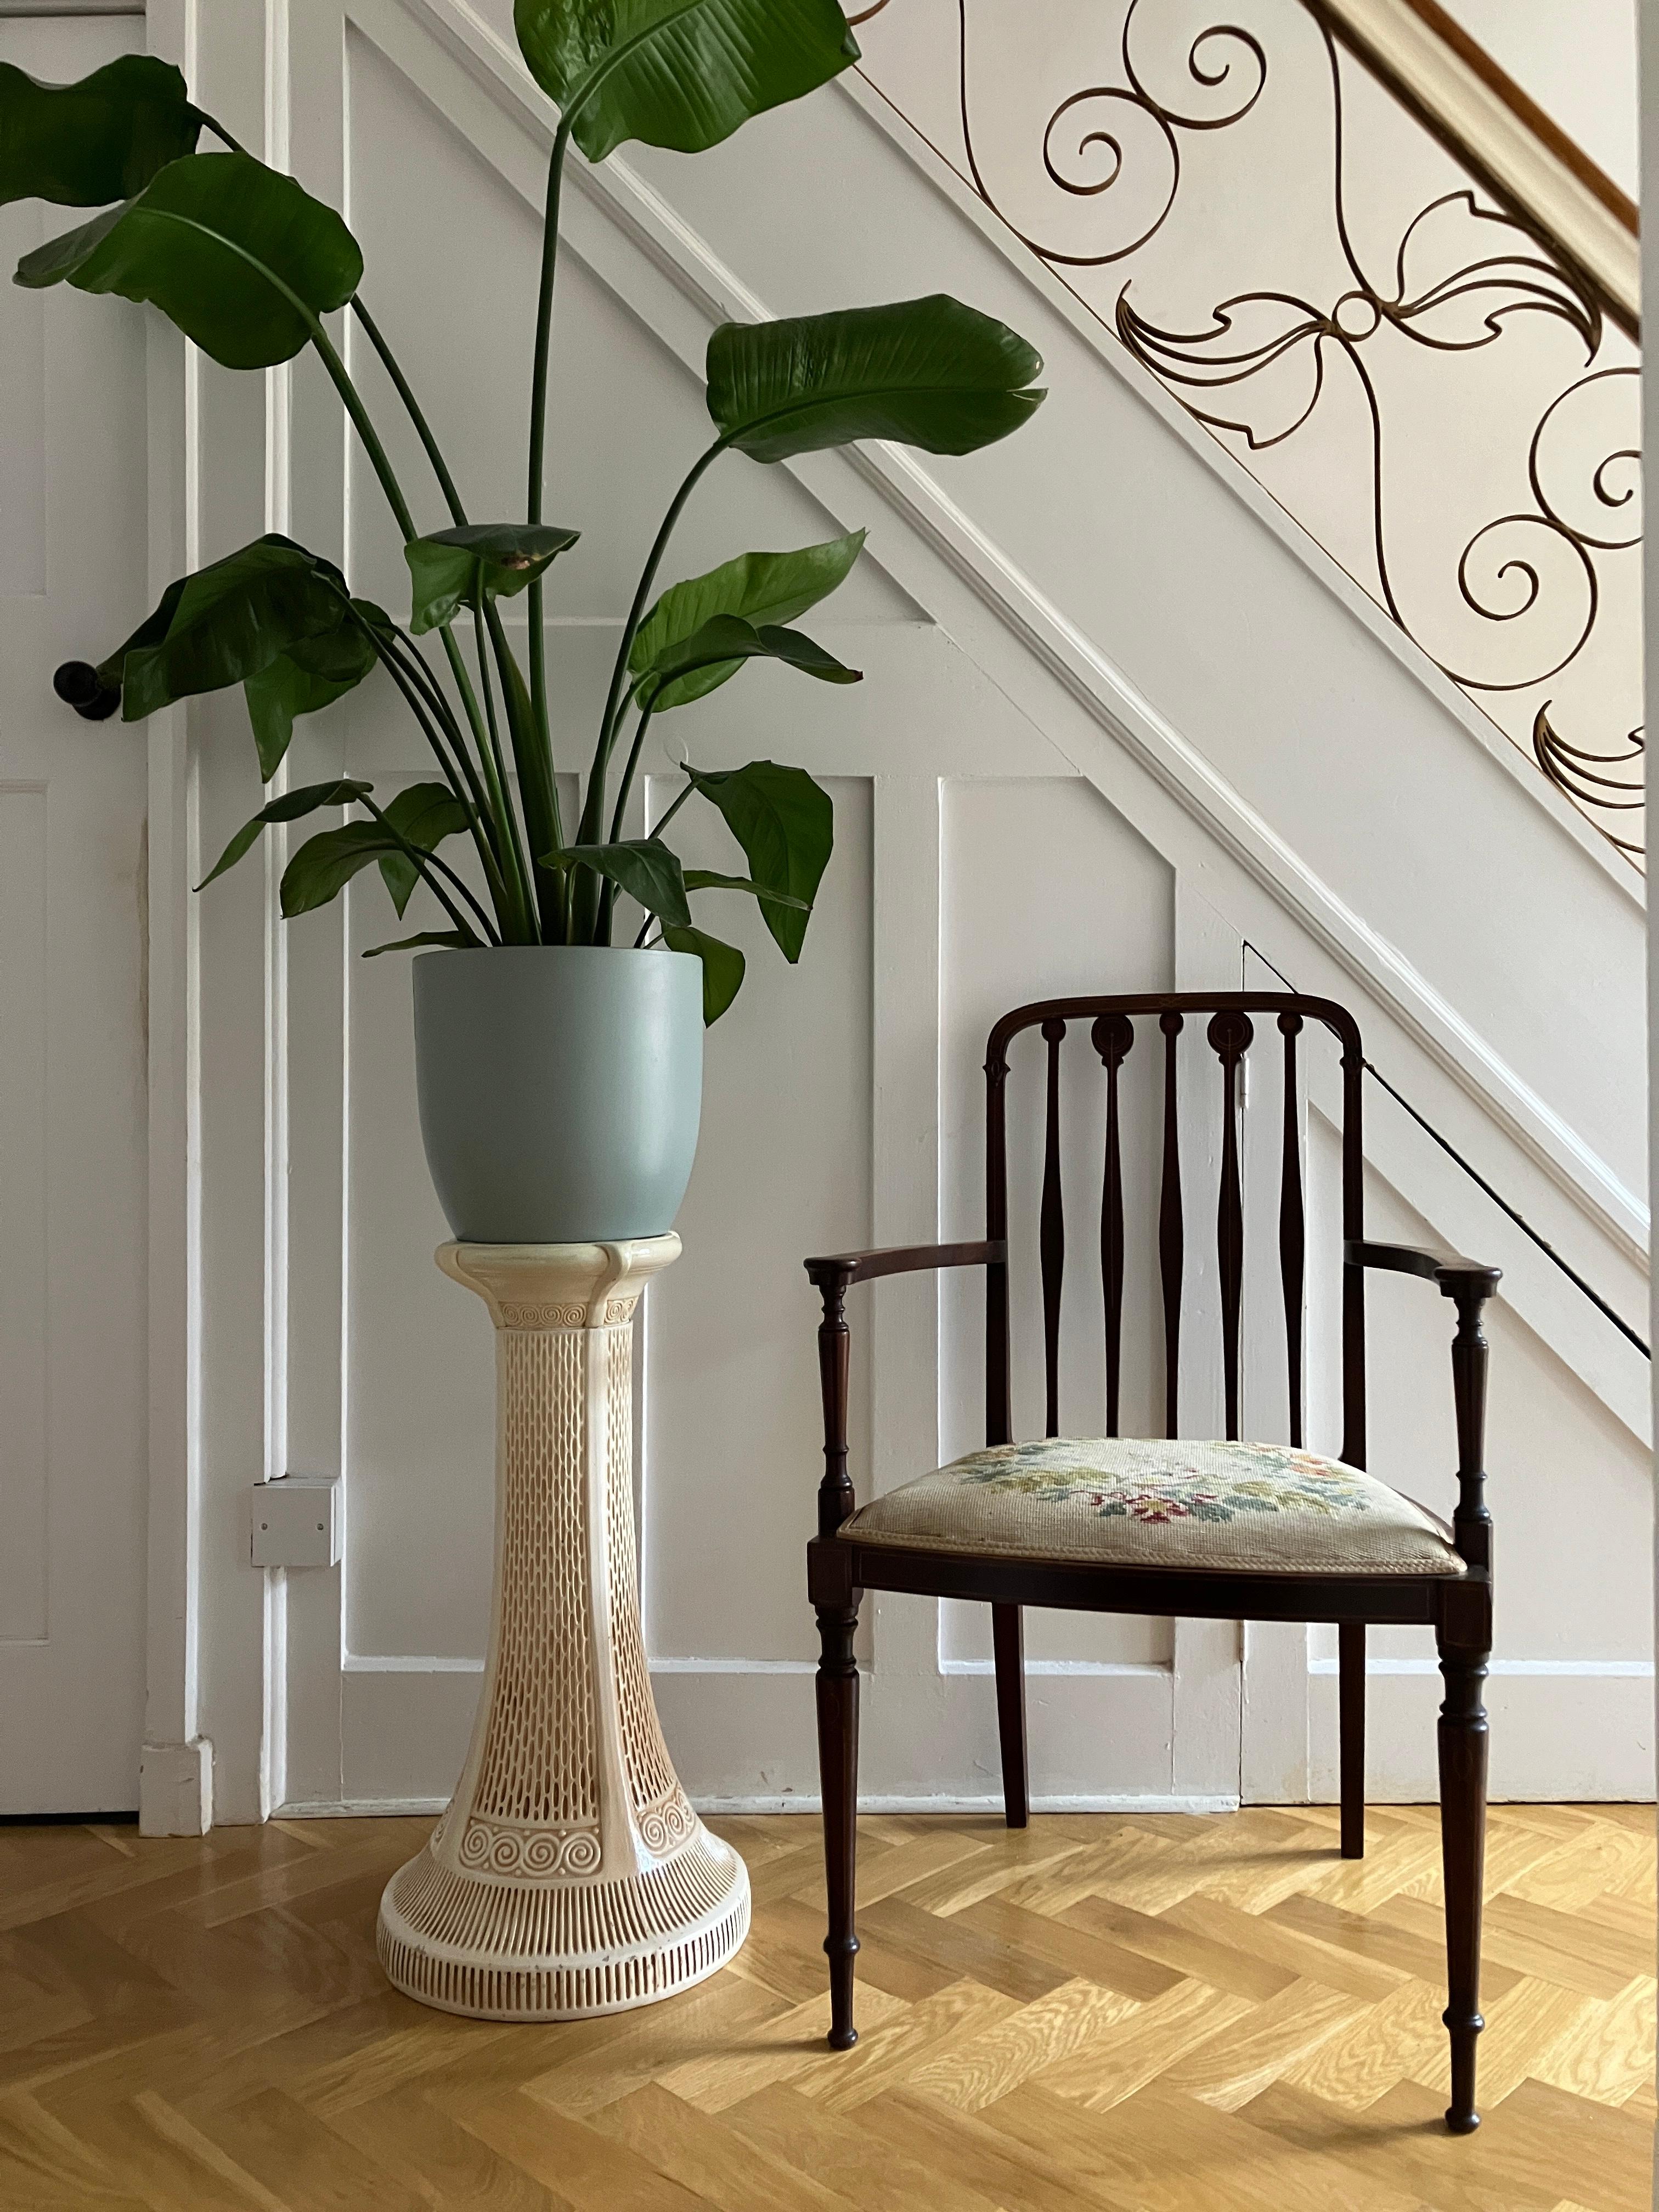 A beautiful bohemian ceramic plinth with an elegant design. The pedestal stand features an elegant embossed design with swirling borders in a cream with brown underplayed glaze. The vintage plinth would look amazing as a plant stand. Printed with